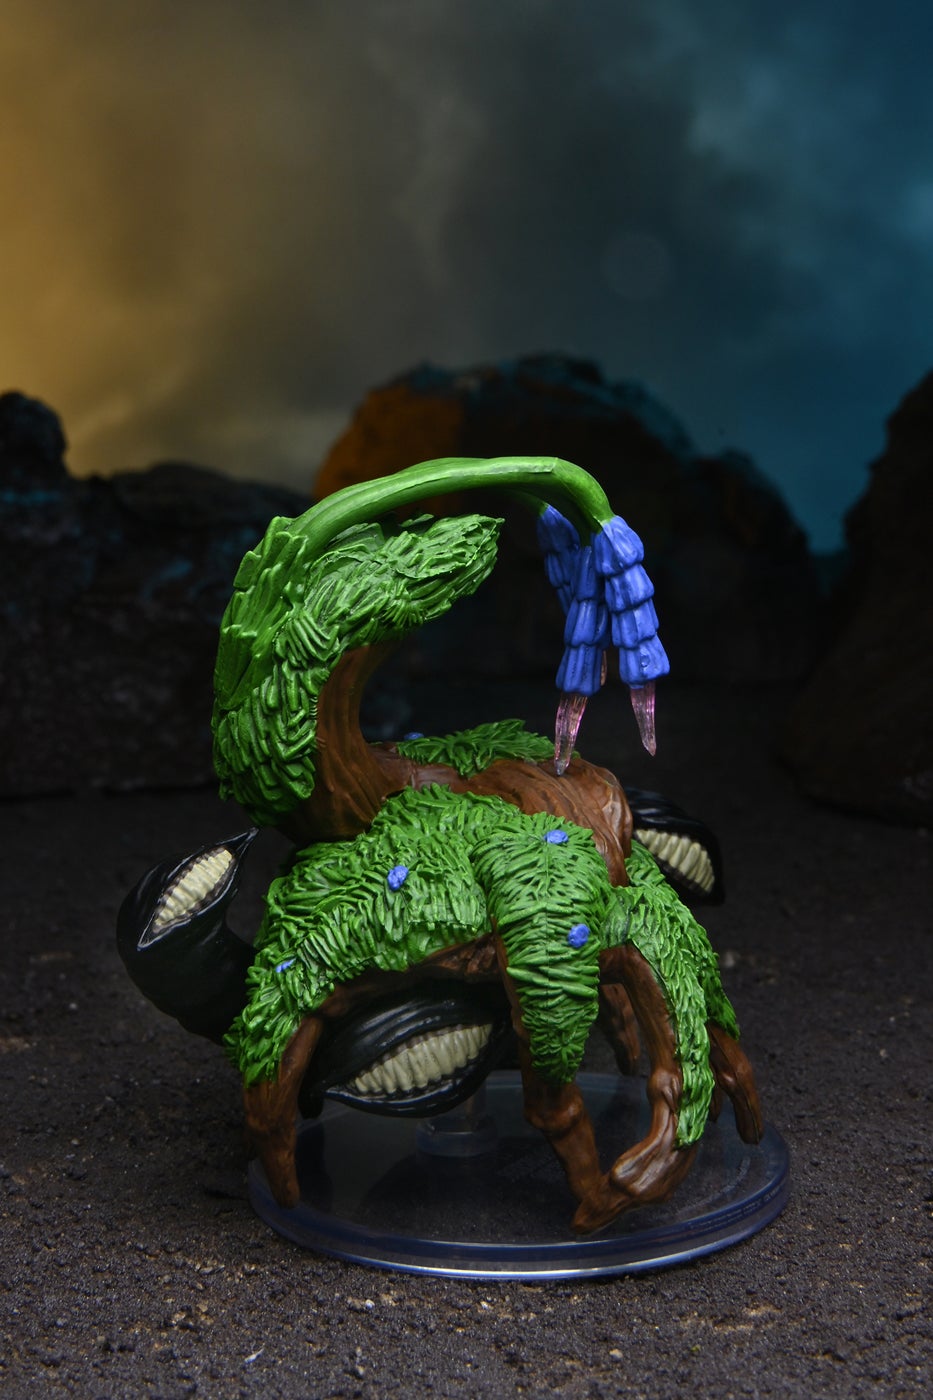 Vracinea mini figure, a large planlike creature with multiple mouths and a lavender-like bloom on its tail